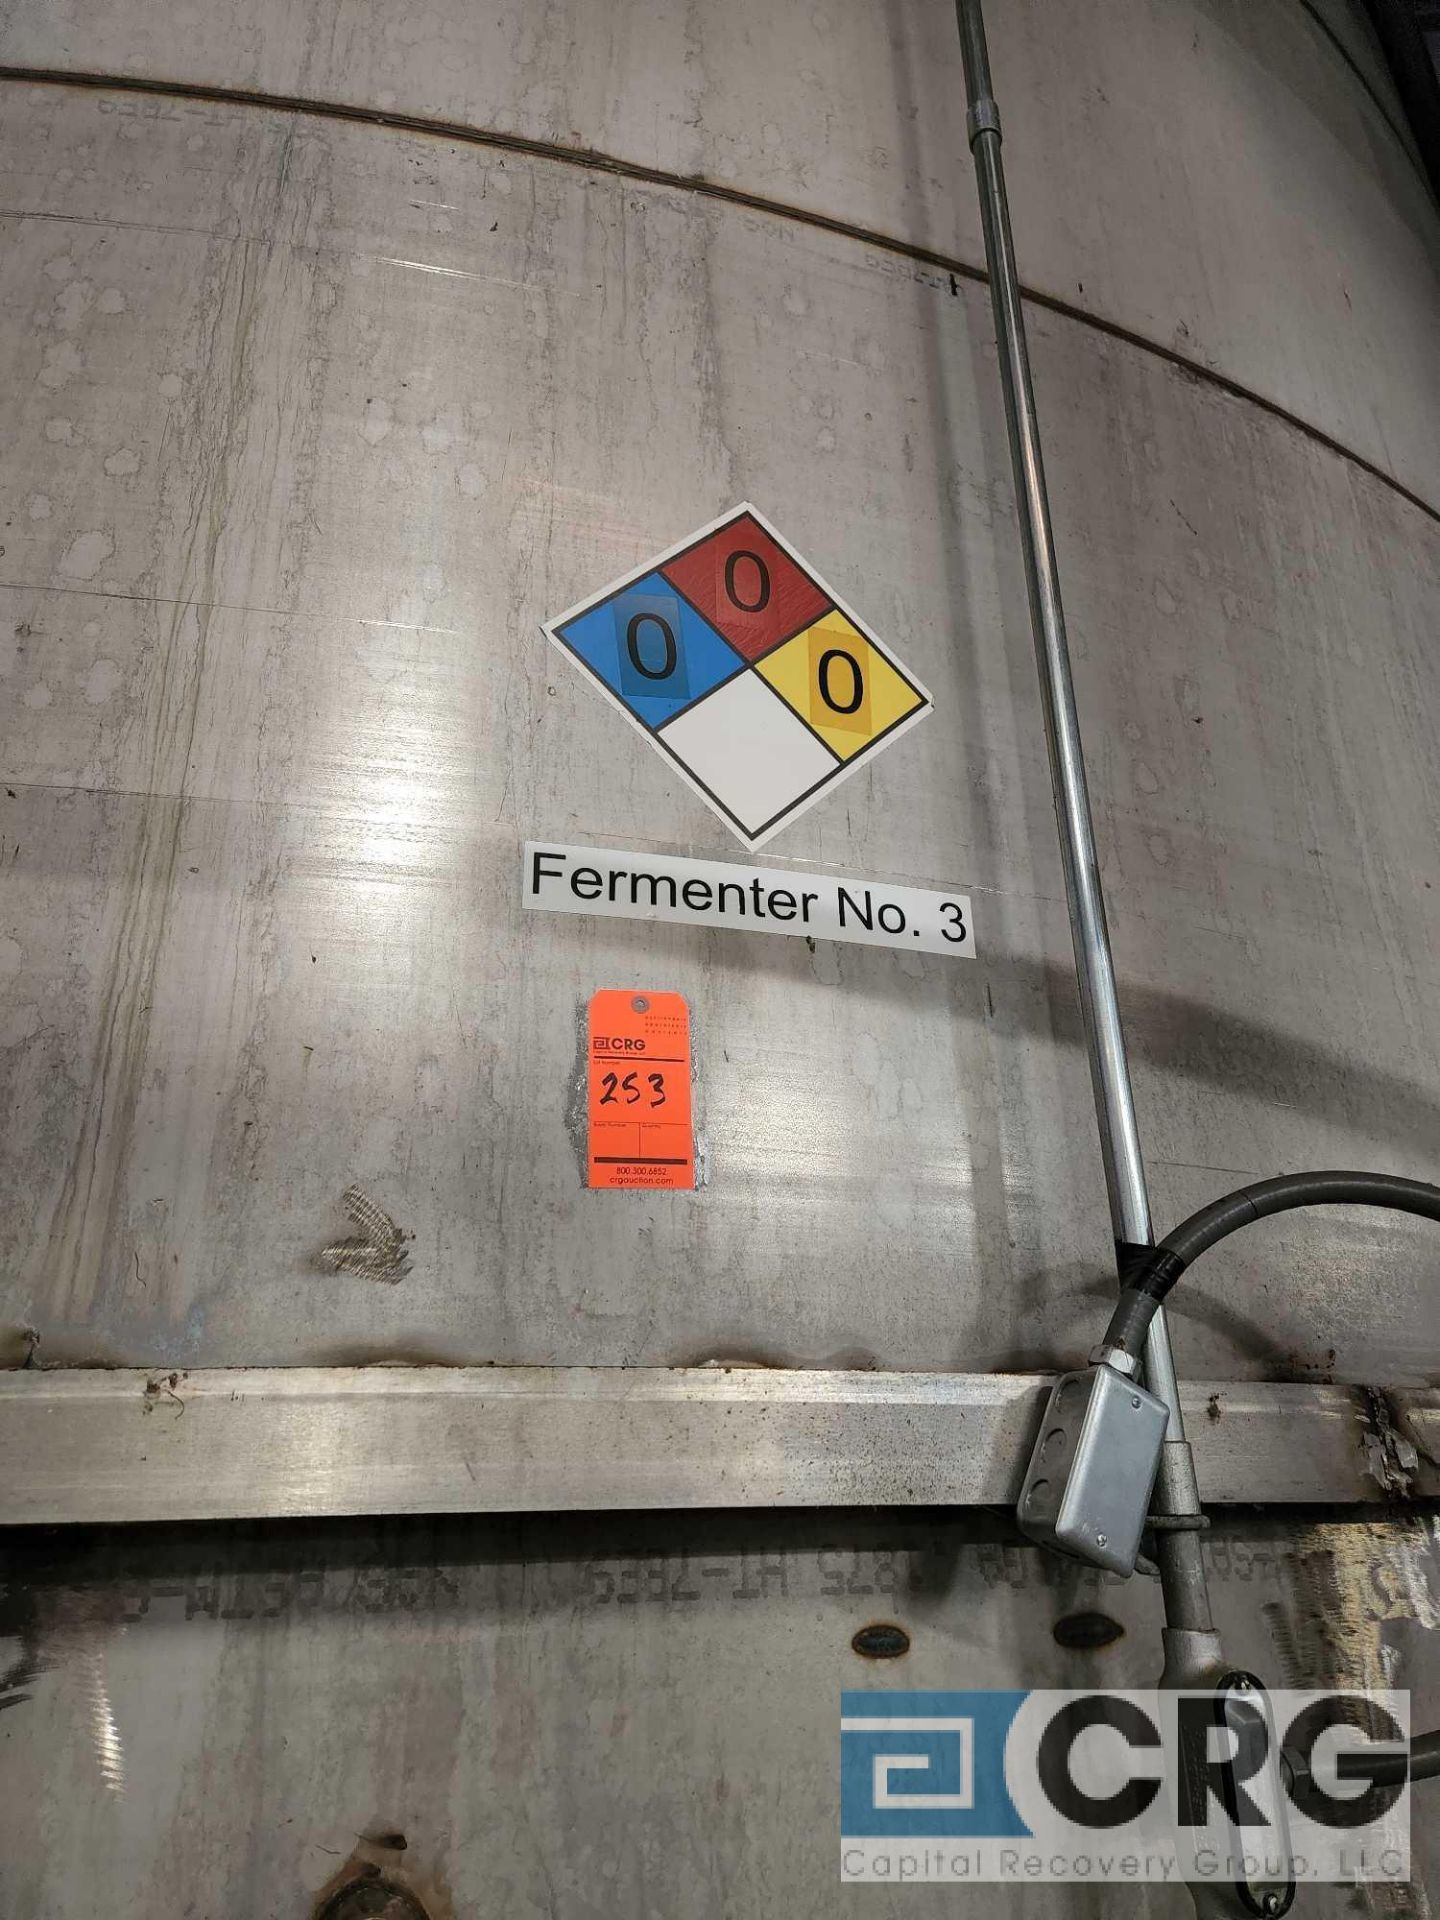 Stainless Steel Fermenting Tank - Image 7 of 9